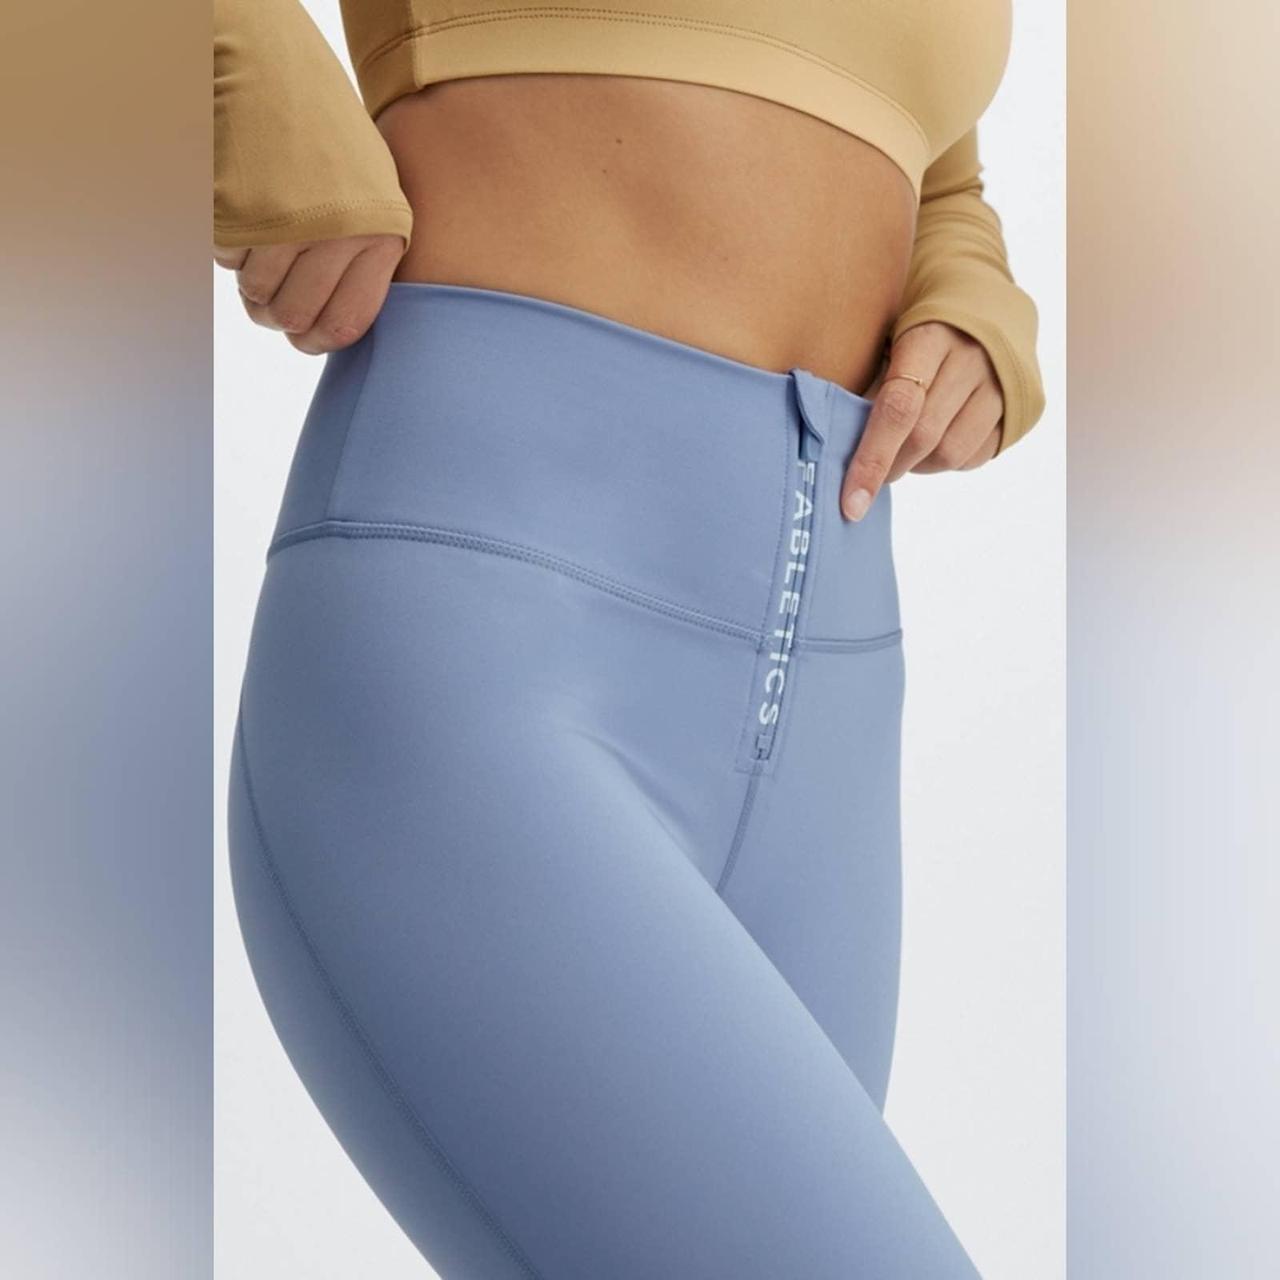 Motion 365 Fabletics baby blue leggings without - Depop